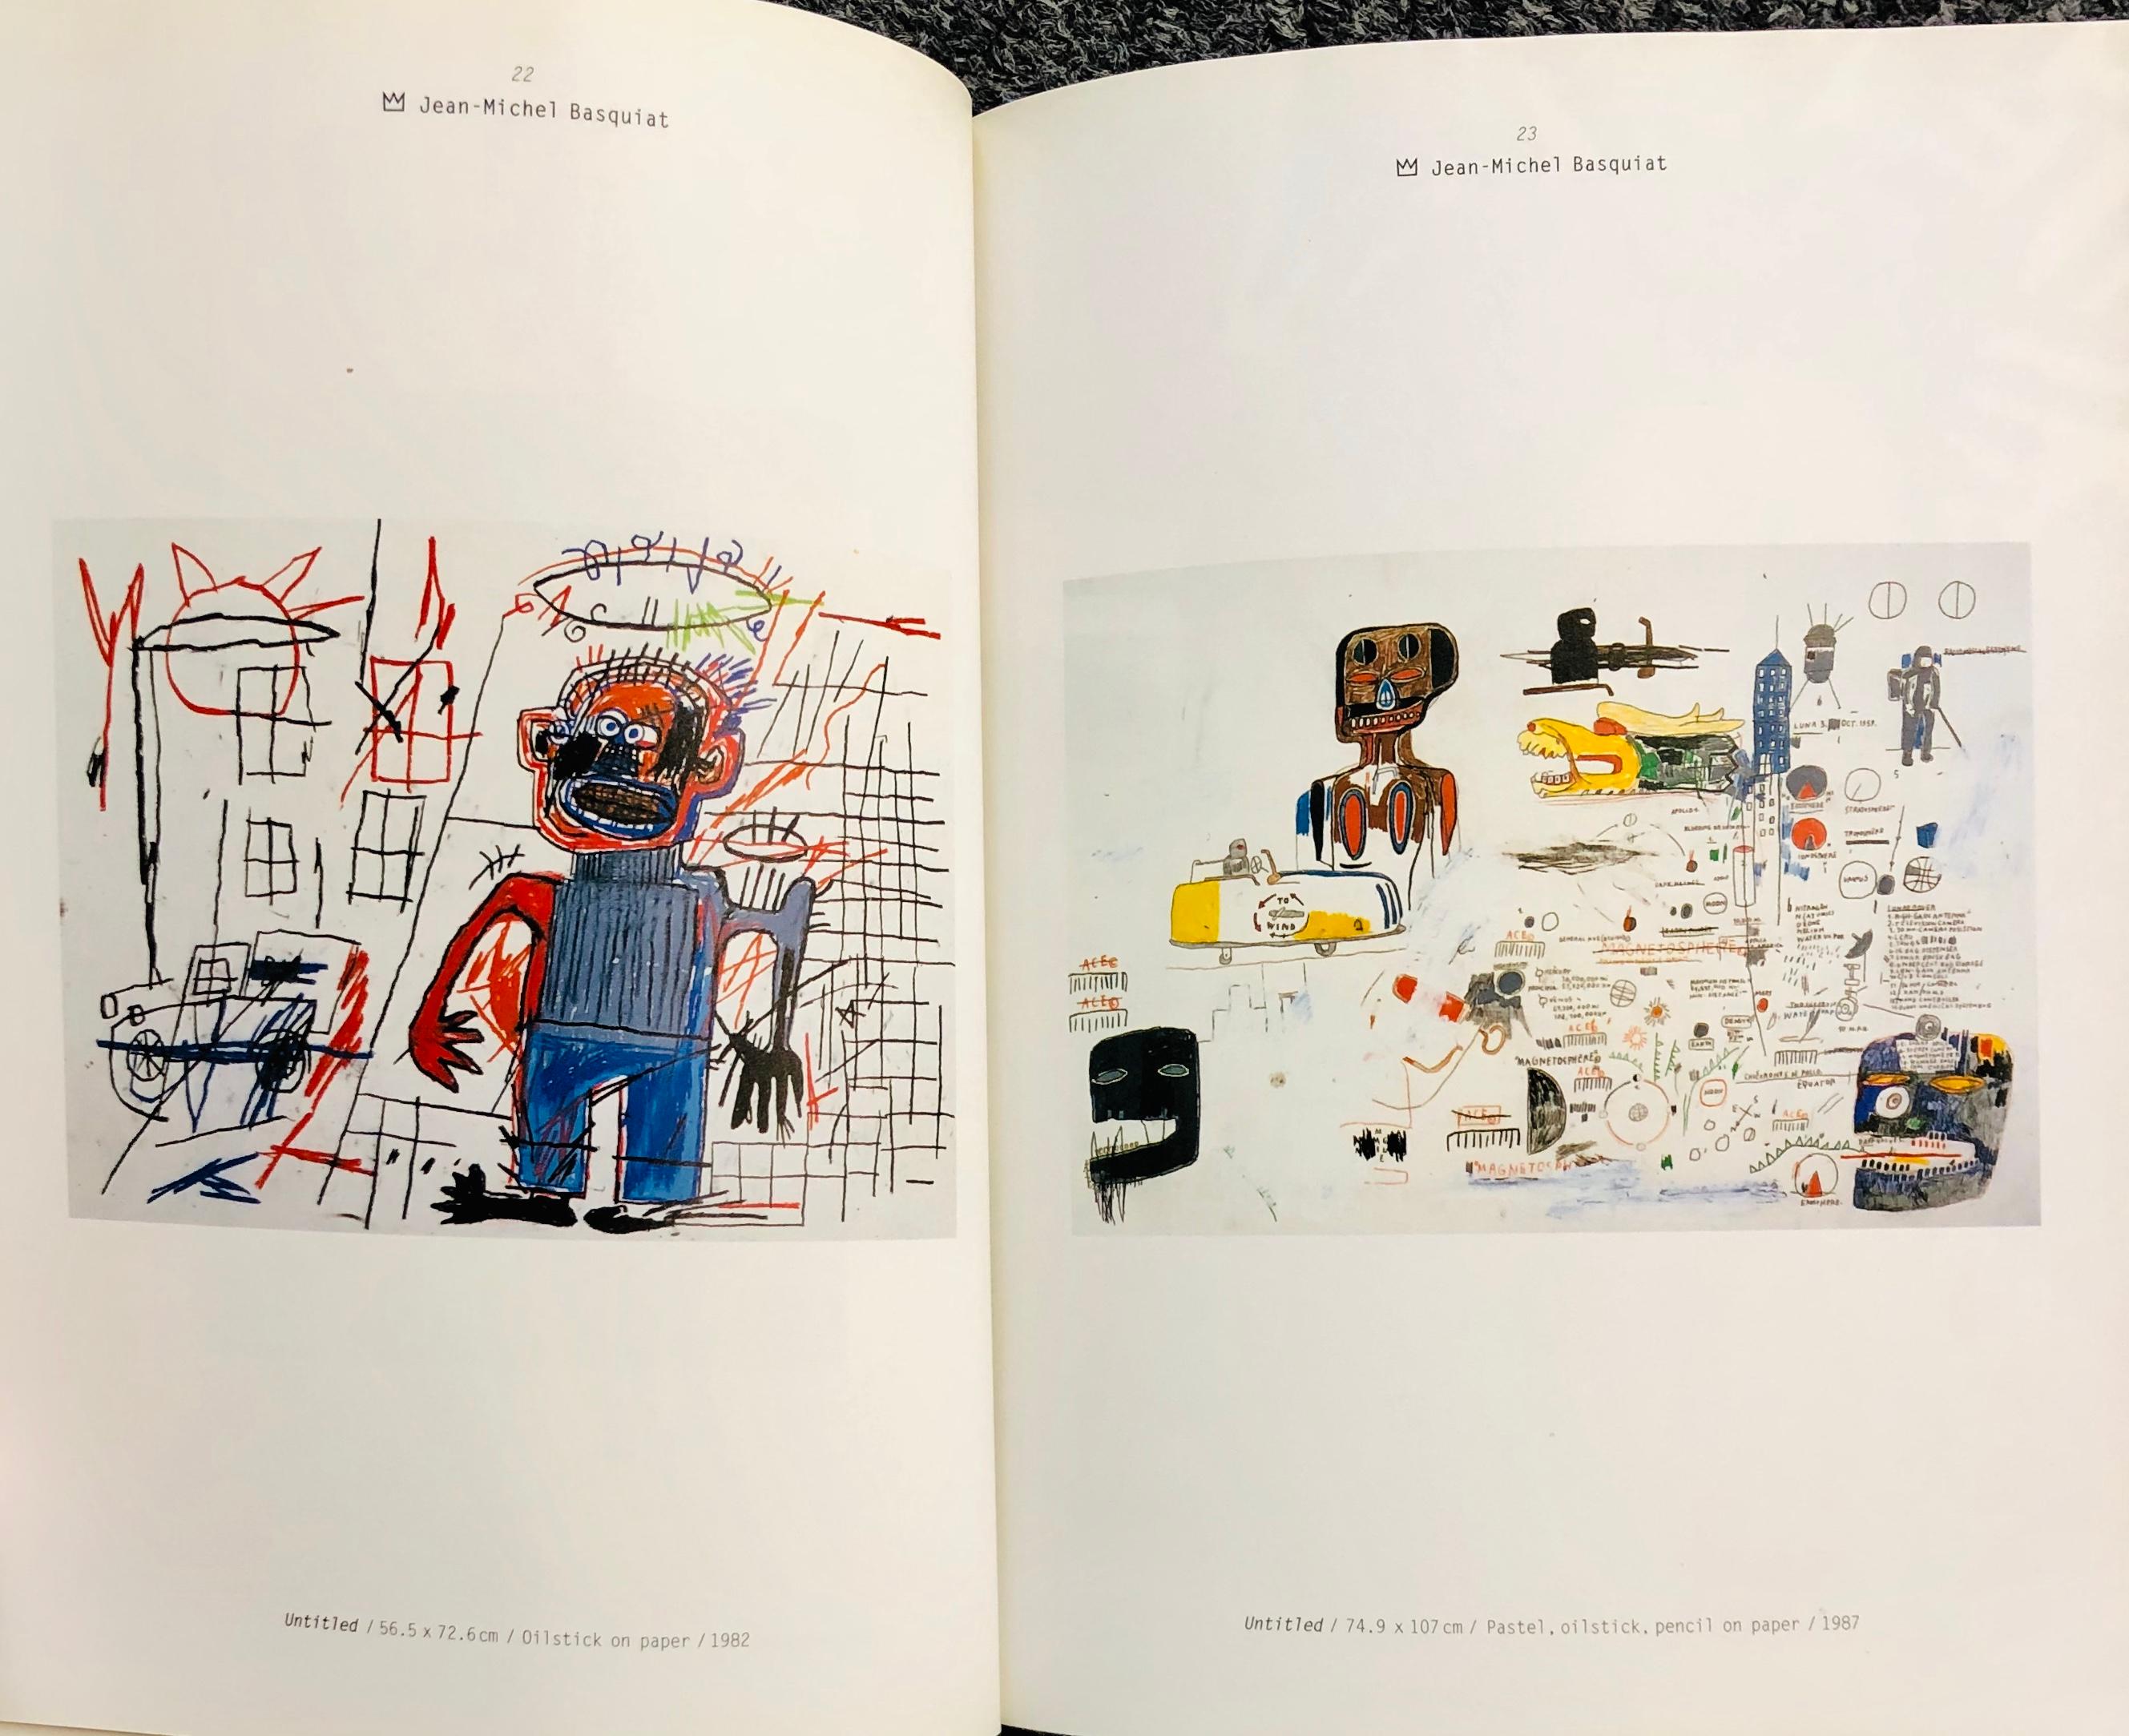 Basquiat Haring & Kenny Scharf at Lio Malca:
Rare 1990s hardcover catalogue featuring works by Jean-Michel Basquiat, Keith Haring, & Kenny Scharf's from the Lio Malca Collection

Hardcover, 1998
61 Pages
Text: Japanese 
8 × 6 inches

Minor